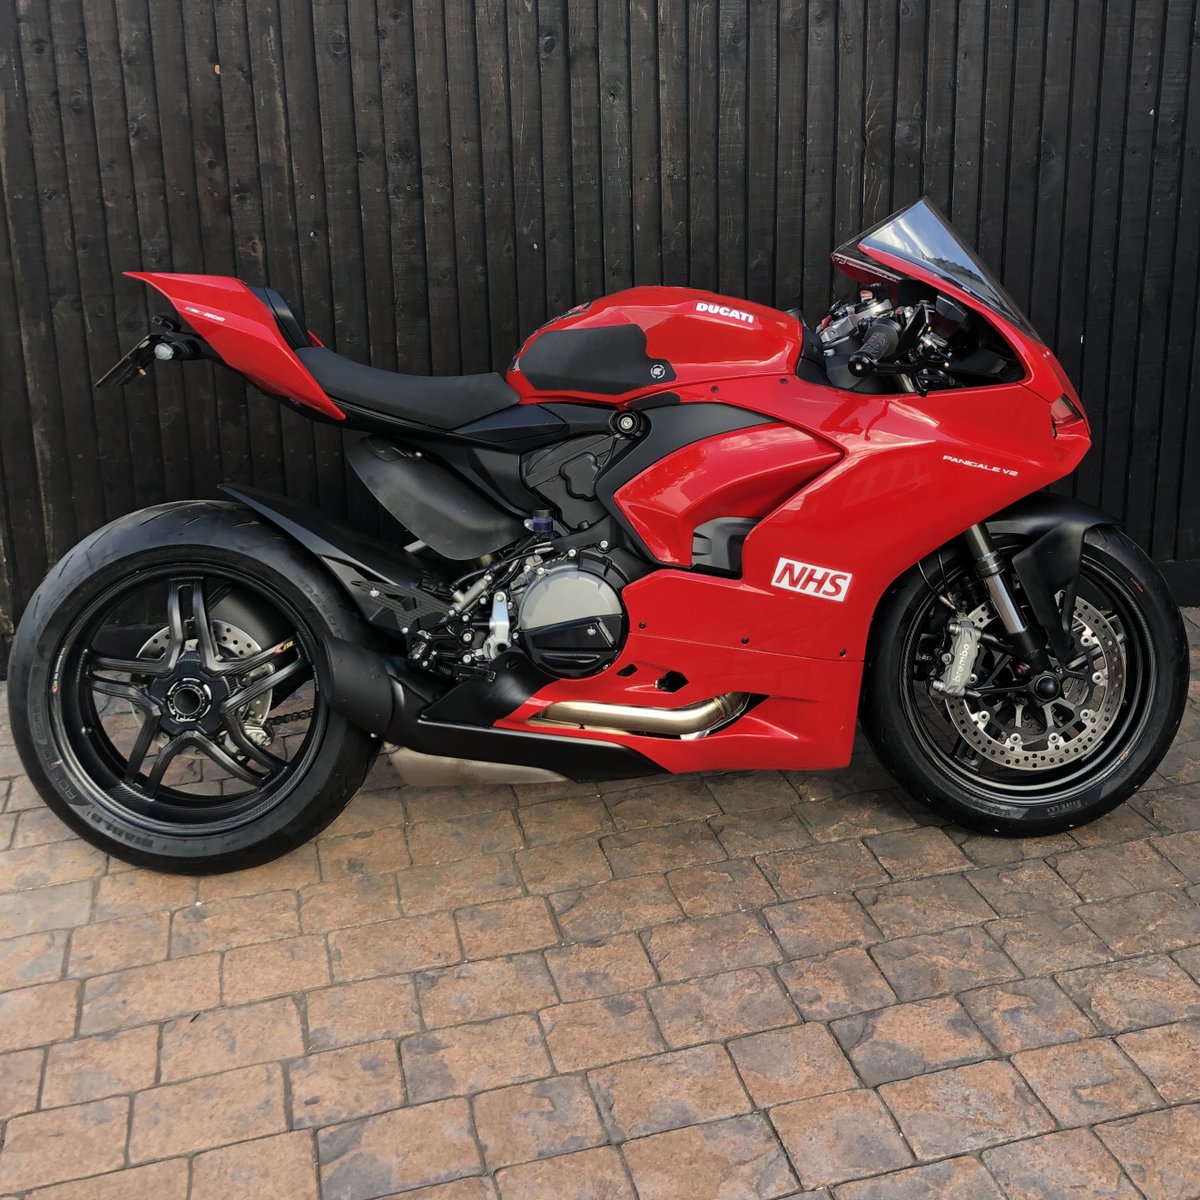 Out with the old… in with the new!
Why not drop in some Carbon Fibre #BSTWheels like #BikeHPS customer Carl on his #DucatiPanigaleV2
bikehps.com/bst/

#BSTCarbonWheels #BSTCarbon #BSTRims #BlackstoneTEK #PanigaleV2 #DucatiPanigale